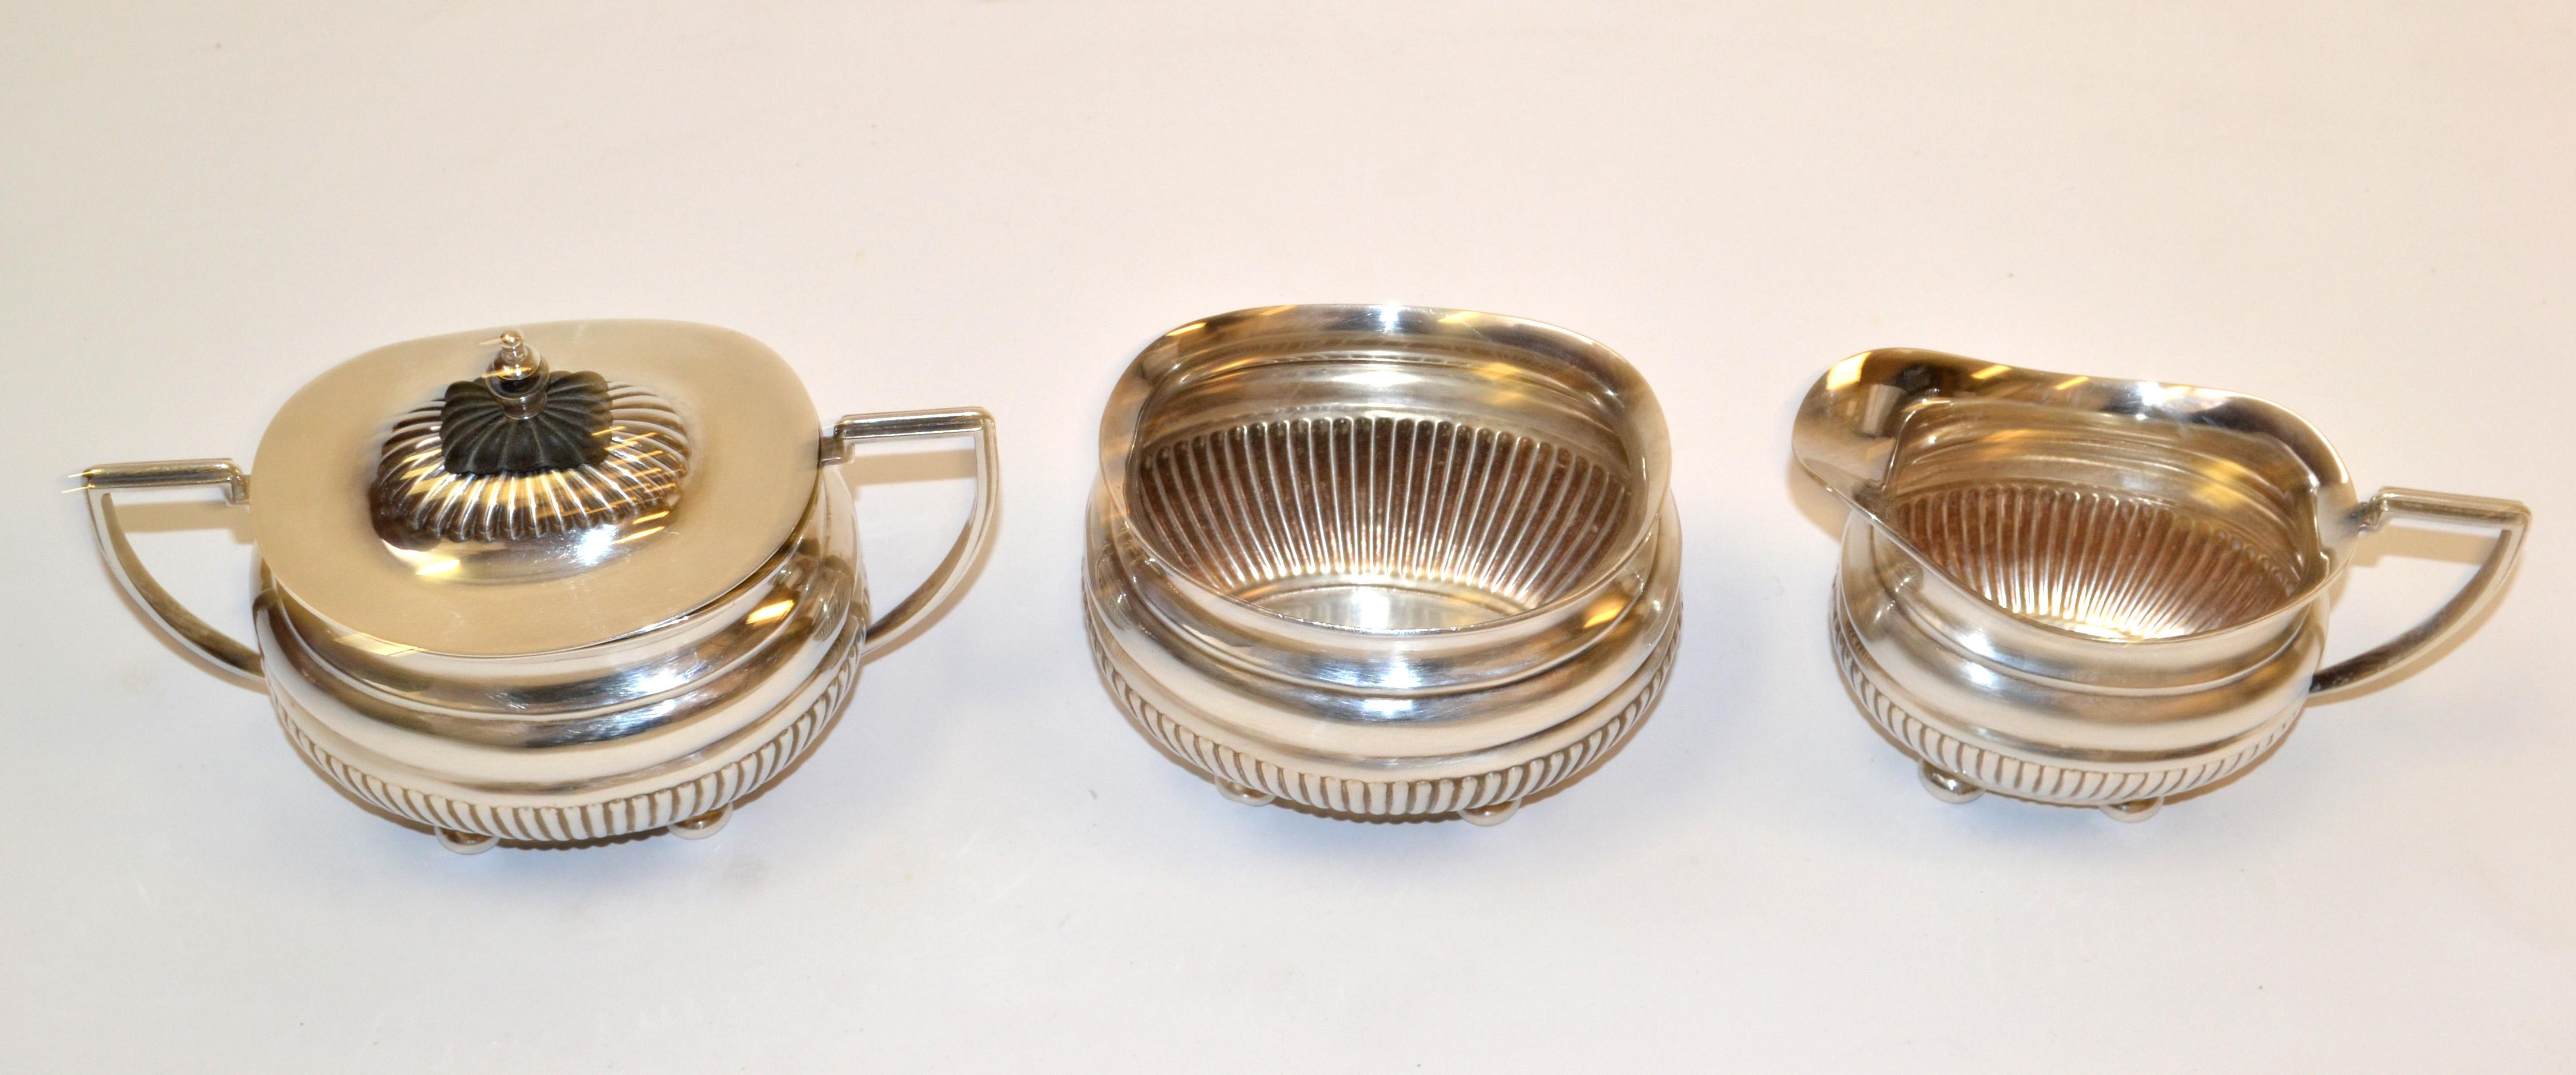 English British Colonial Antique 1910 Cheltenham Silver Coffee Service Sheffield England For Sale